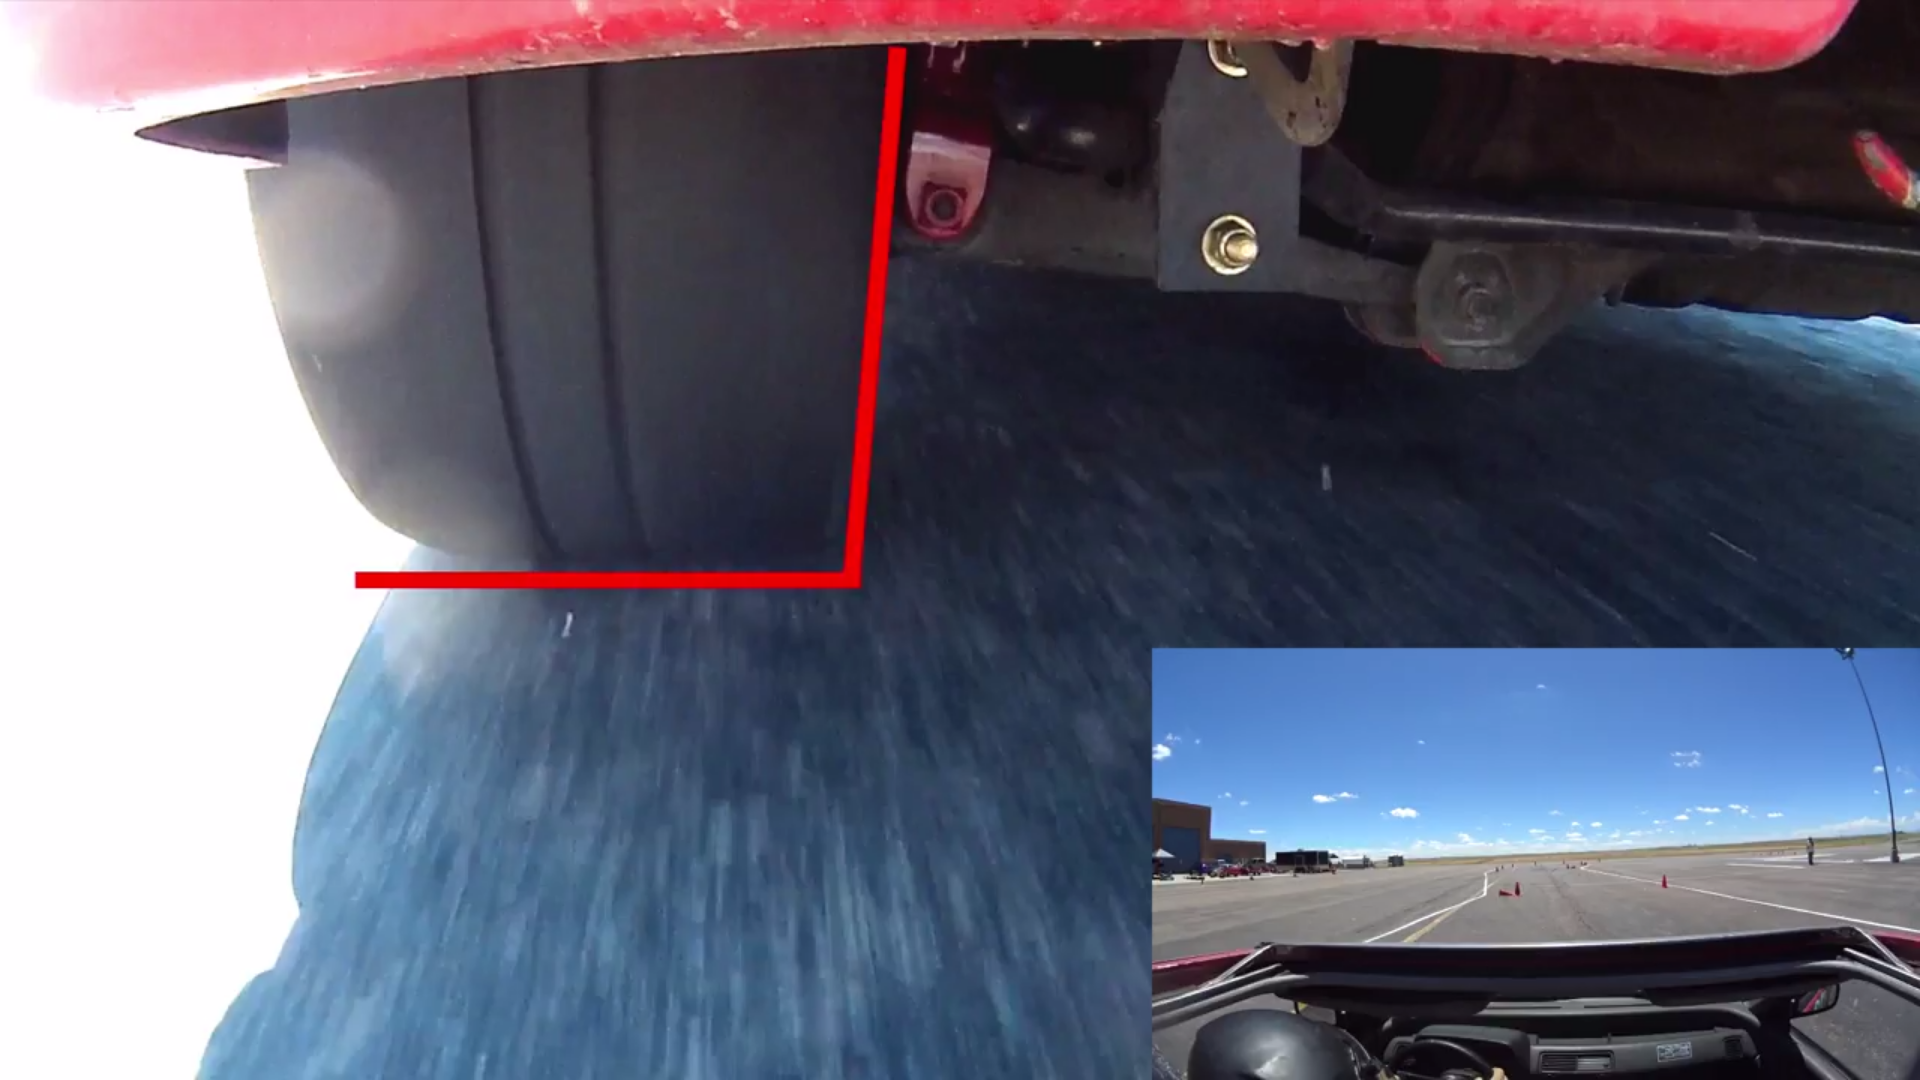 Watch How Your Tires and Suspension Handle an Autocross Event